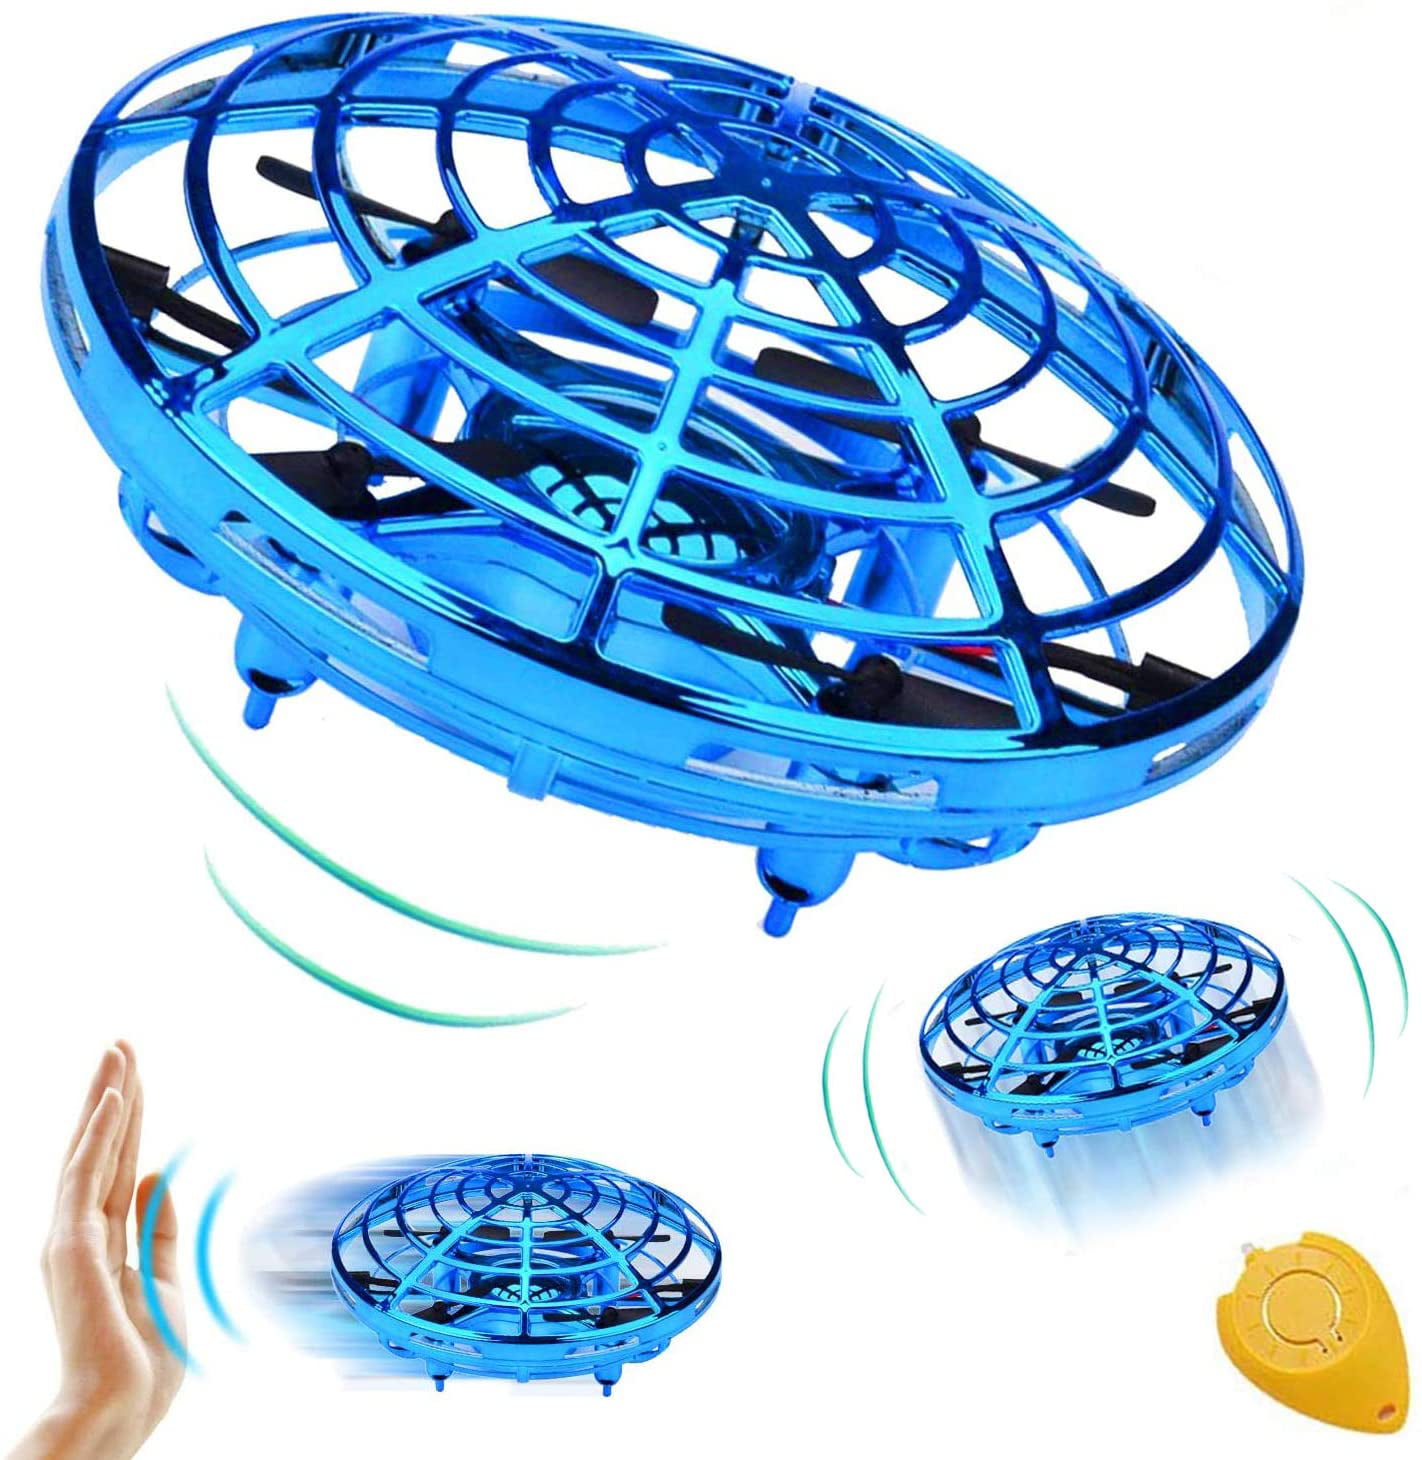 Yothfly Flying Ball Mini Drone RC Toys for Kids Adults 360° Rotating Hand Controlled Quadcopter Helicopter Ball Flying Toys Nice Gift for Boys Girls 